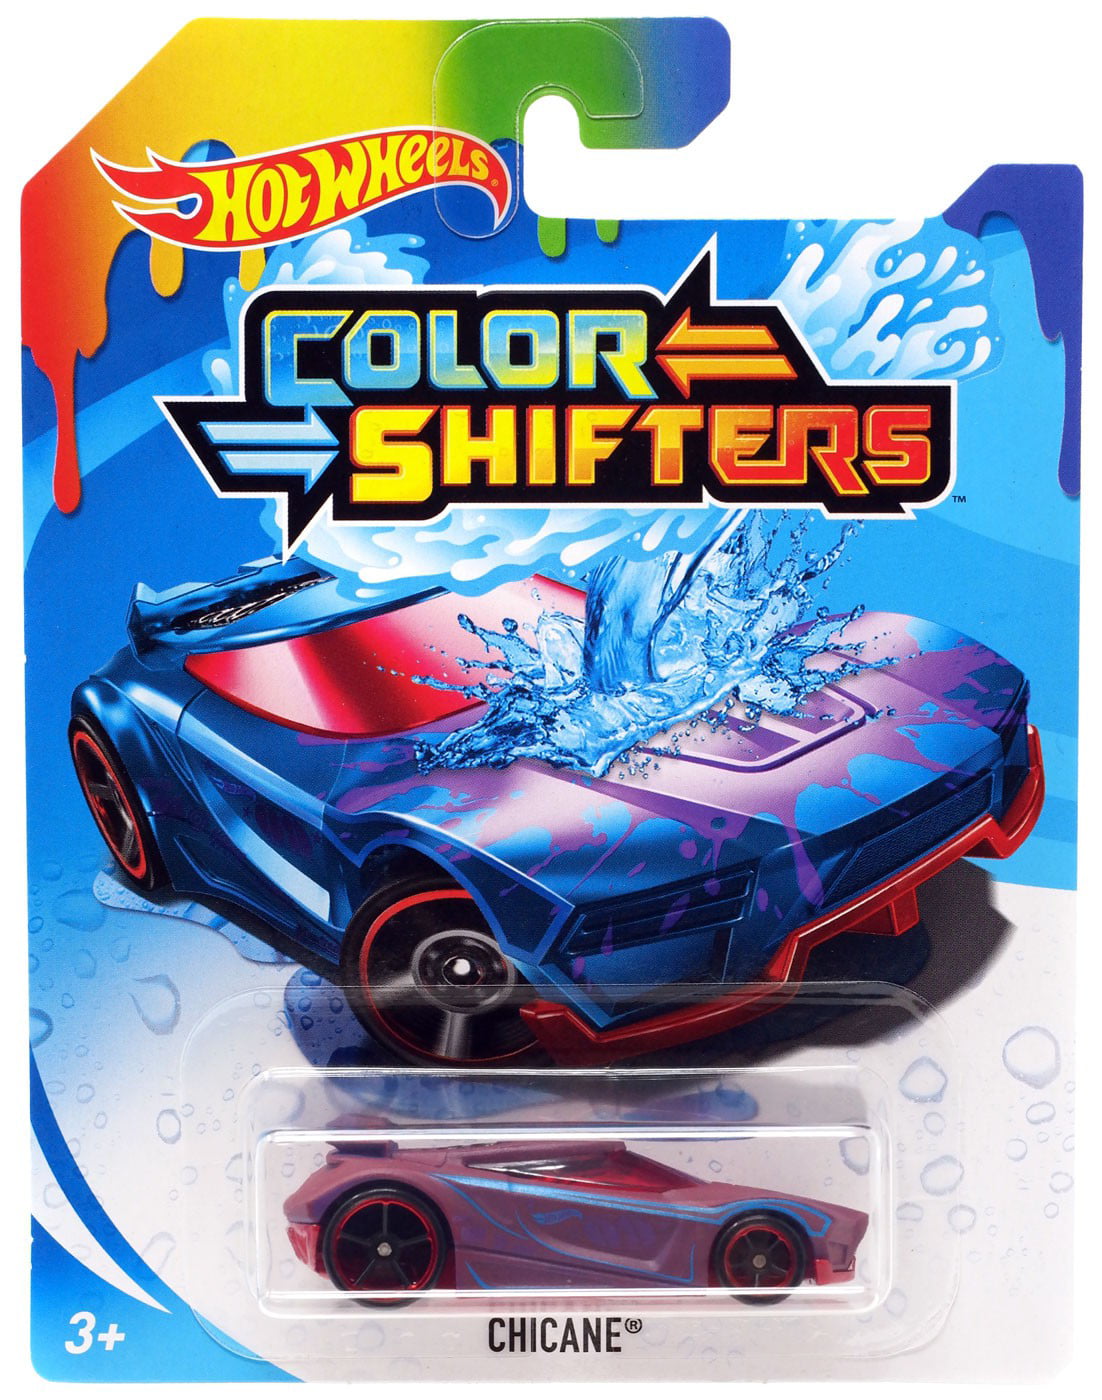 Hot Wheels Color Shifters Chicane DieCast Car